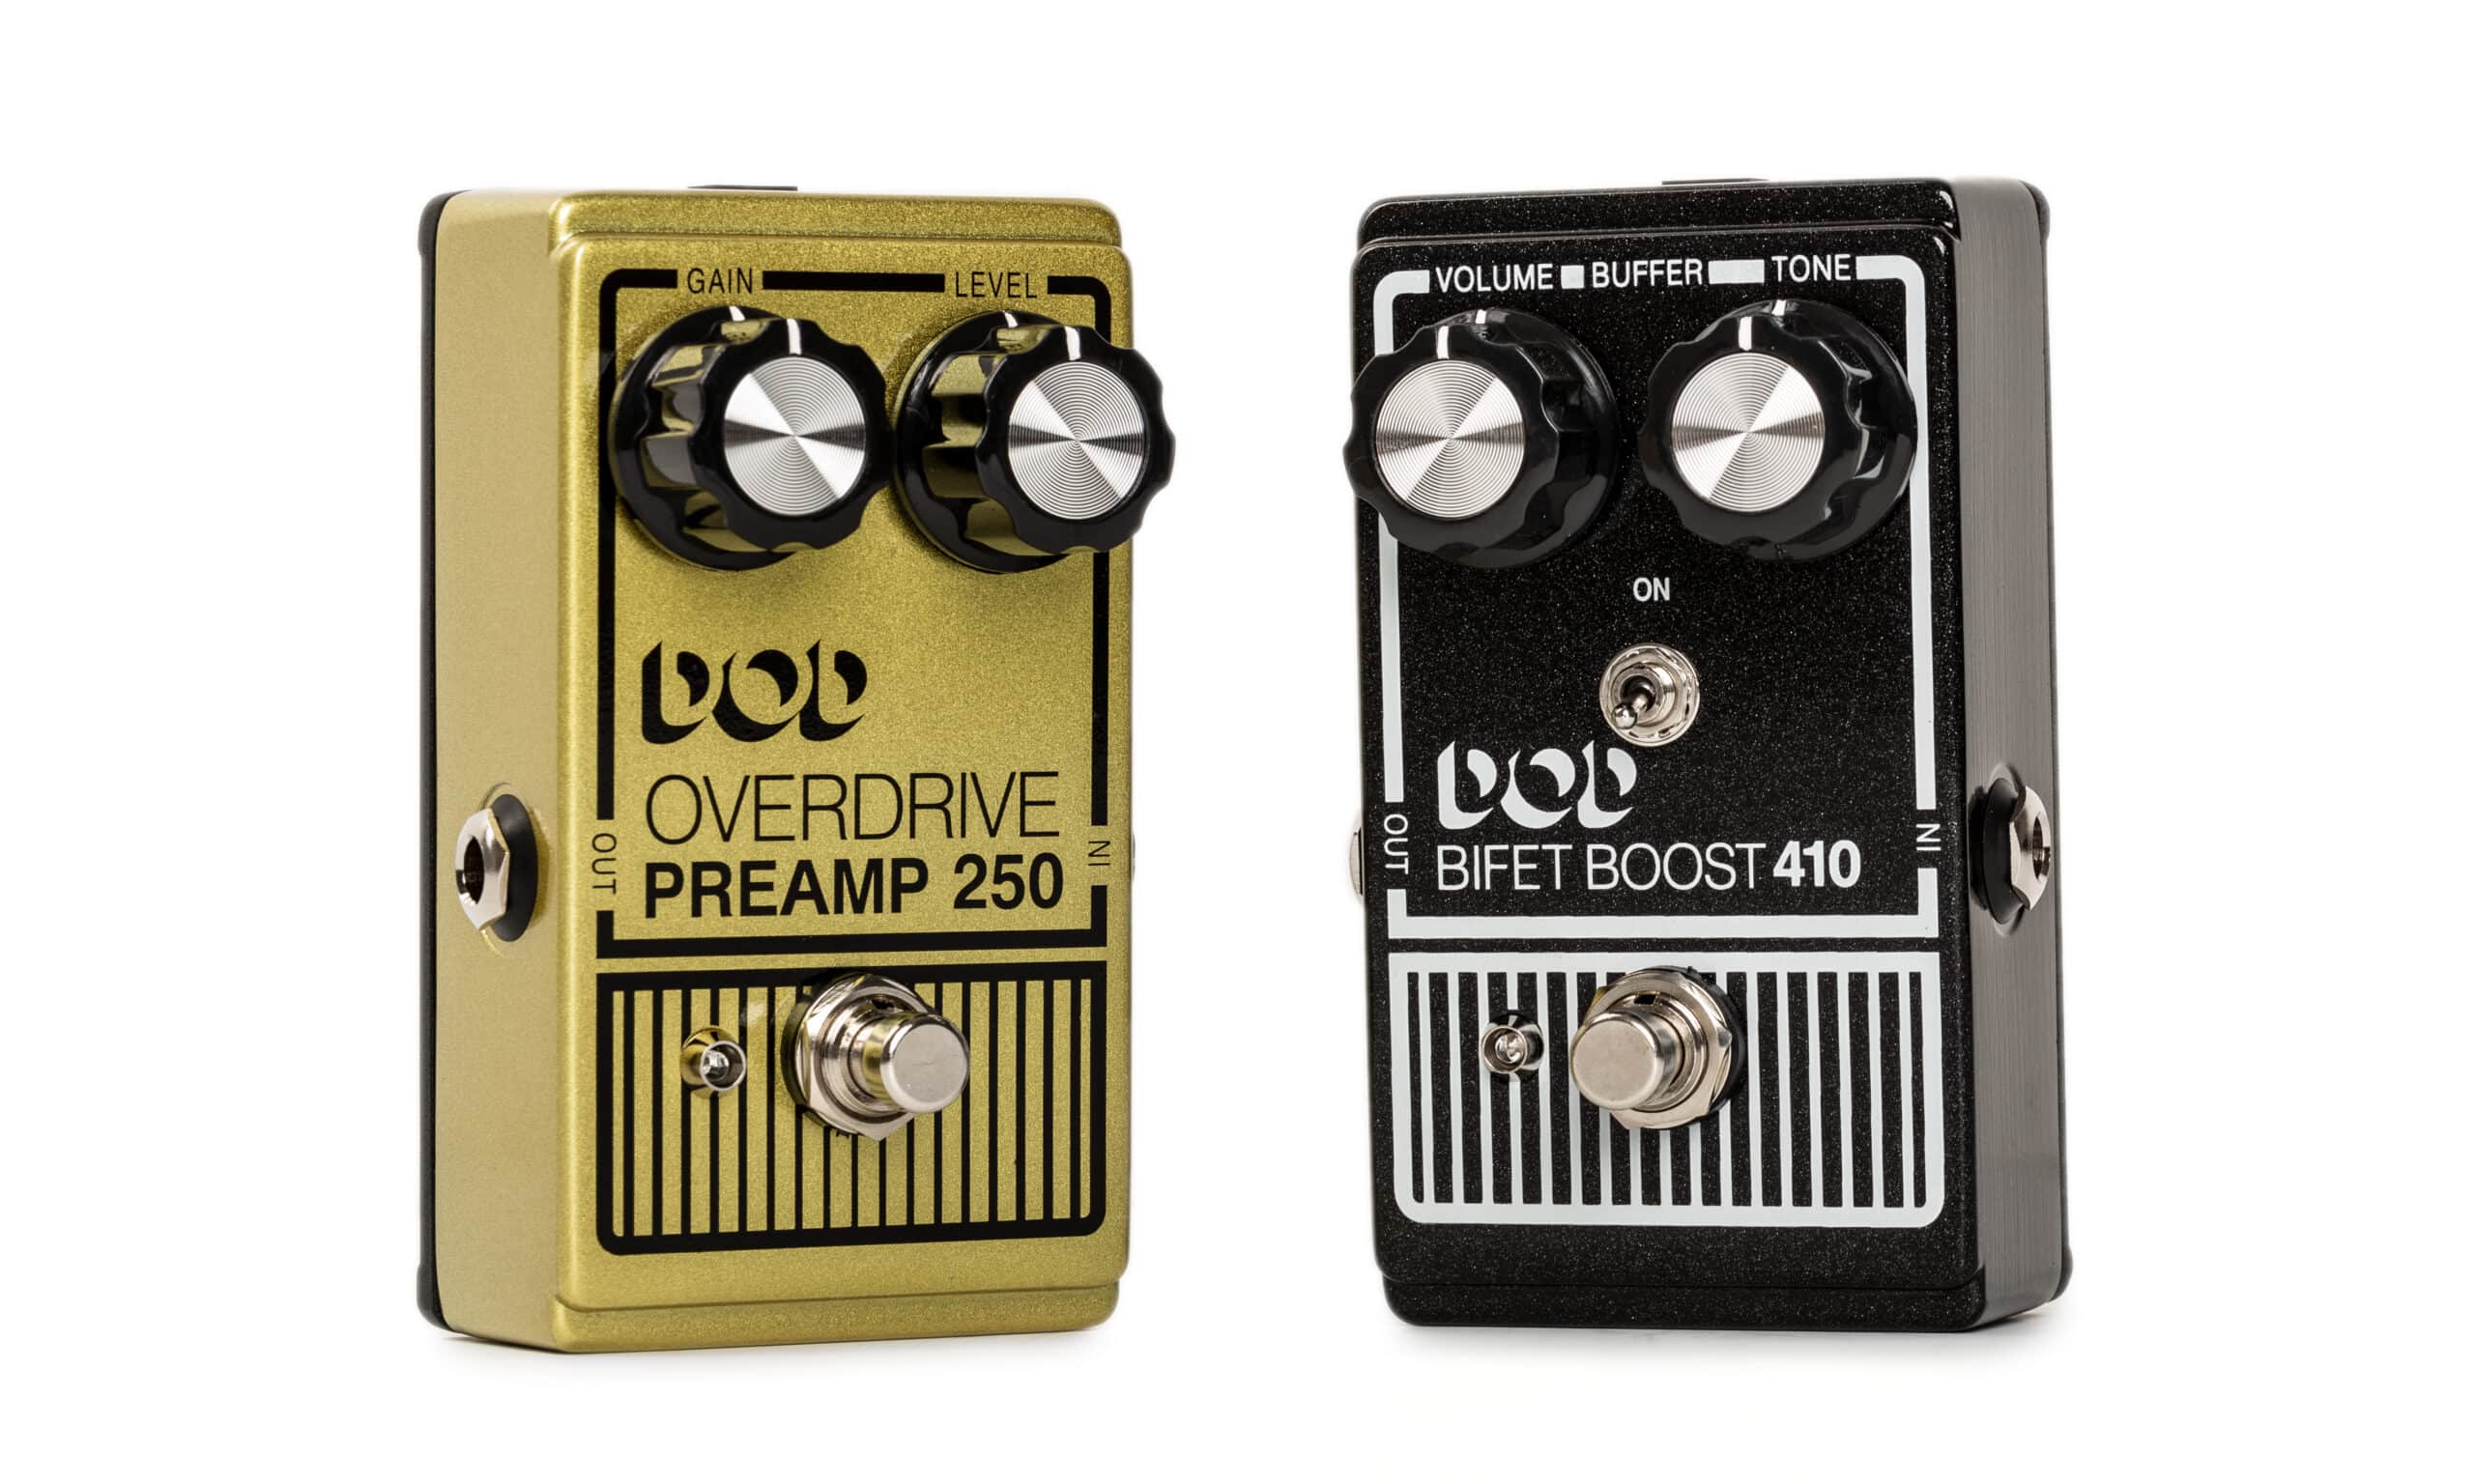 DOD Overdrive Preamp 250 & Bifet Boost 410